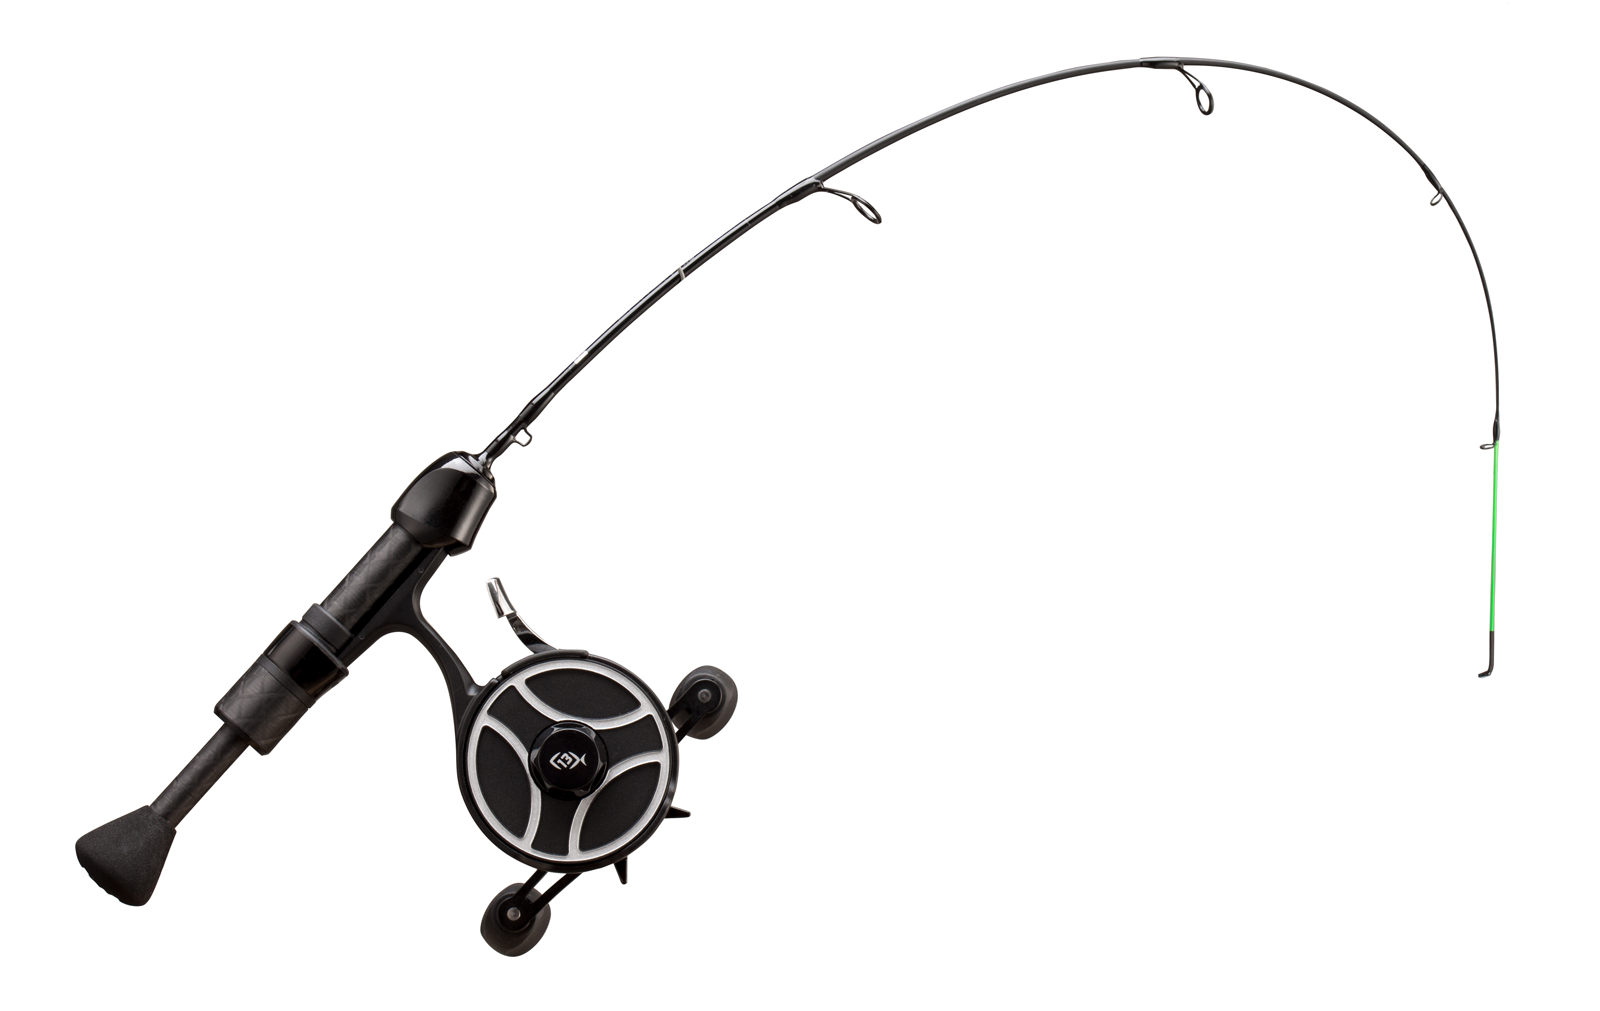 13 FISHING - The Snitch Pro/Freefall Ghost - Inline Ice Fishing Combo - 23 With Flex-Core Quick Action Tip - Left Hand Retrieve - SNPFF-23-LH Black